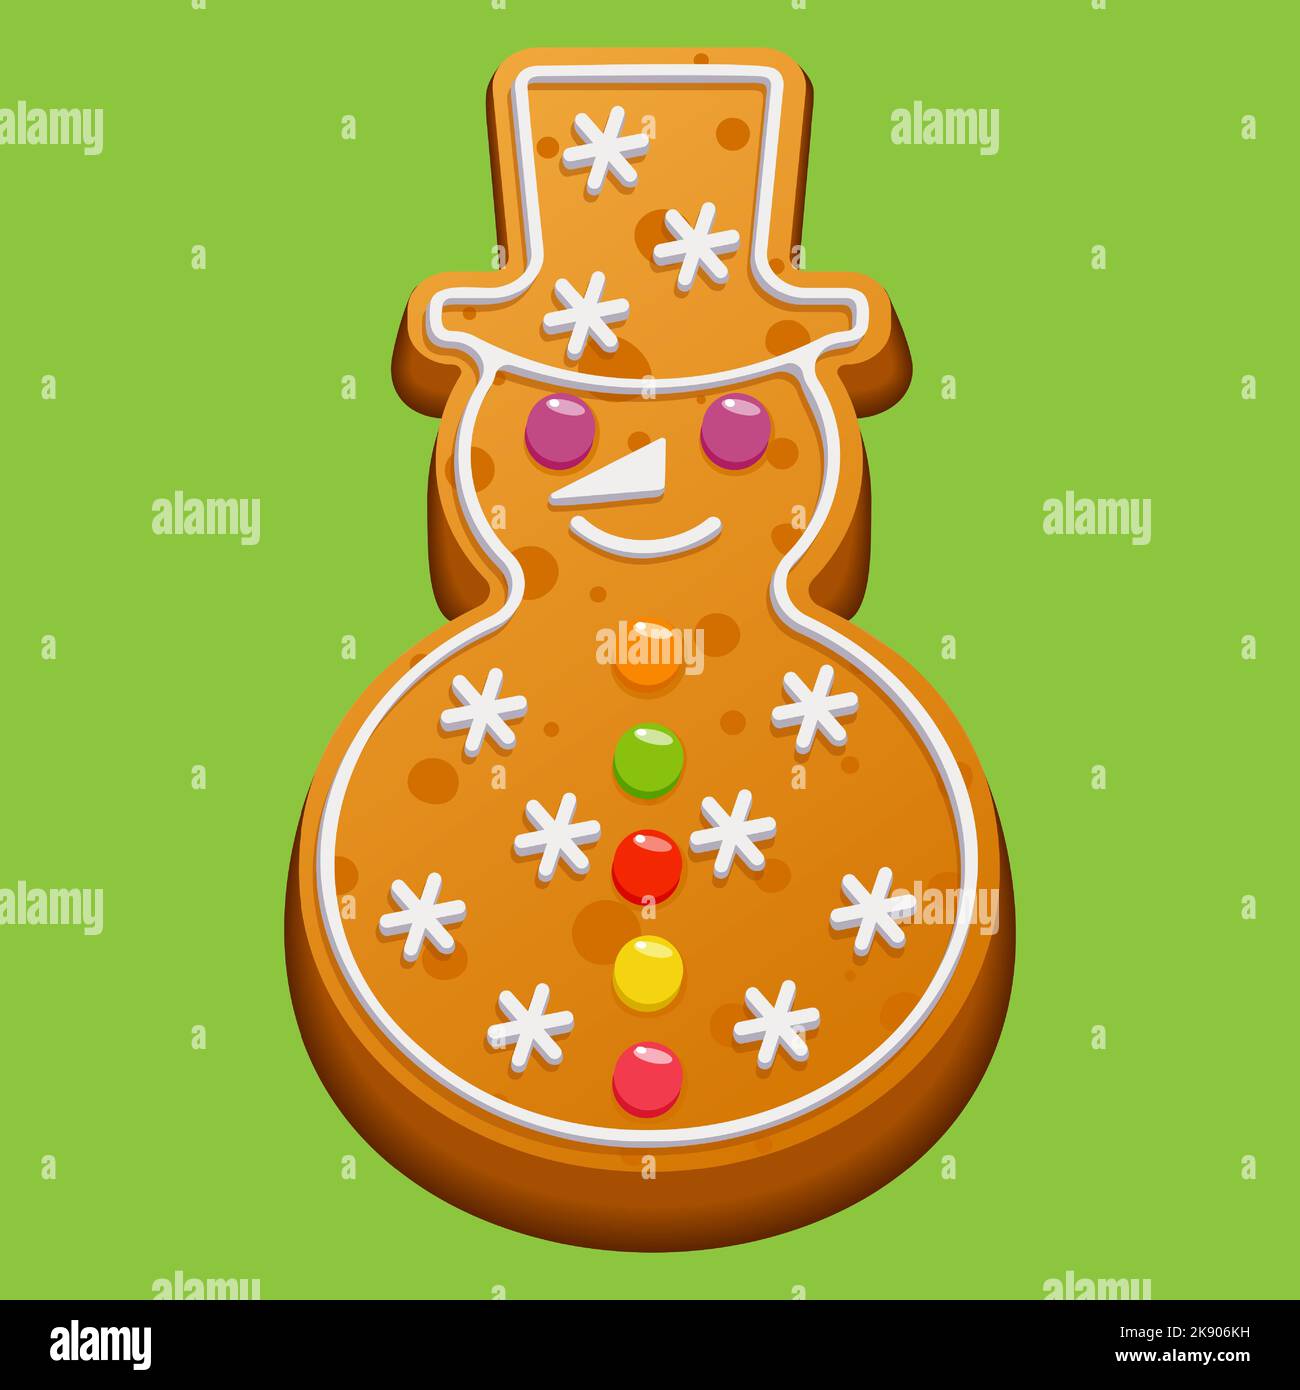 Christmas Gingerbread Snowman. Homemade holiday winter cookies with sugar icing and marmalade. Vector illustration. Stock Vector